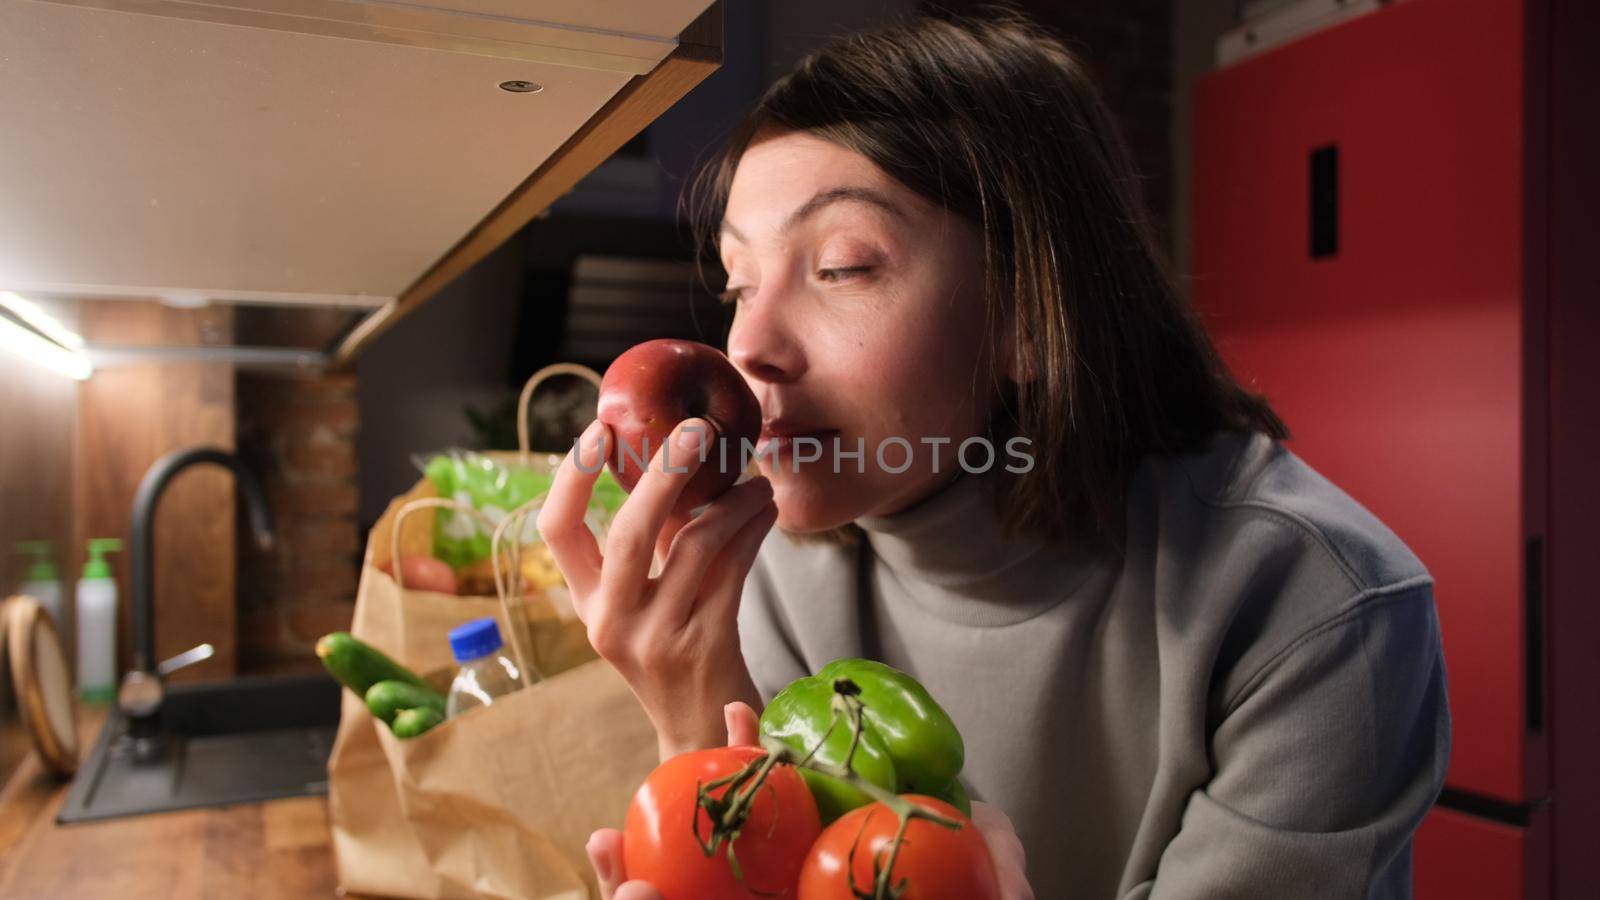 Lady smelling tomatoes and pepper by Demkat